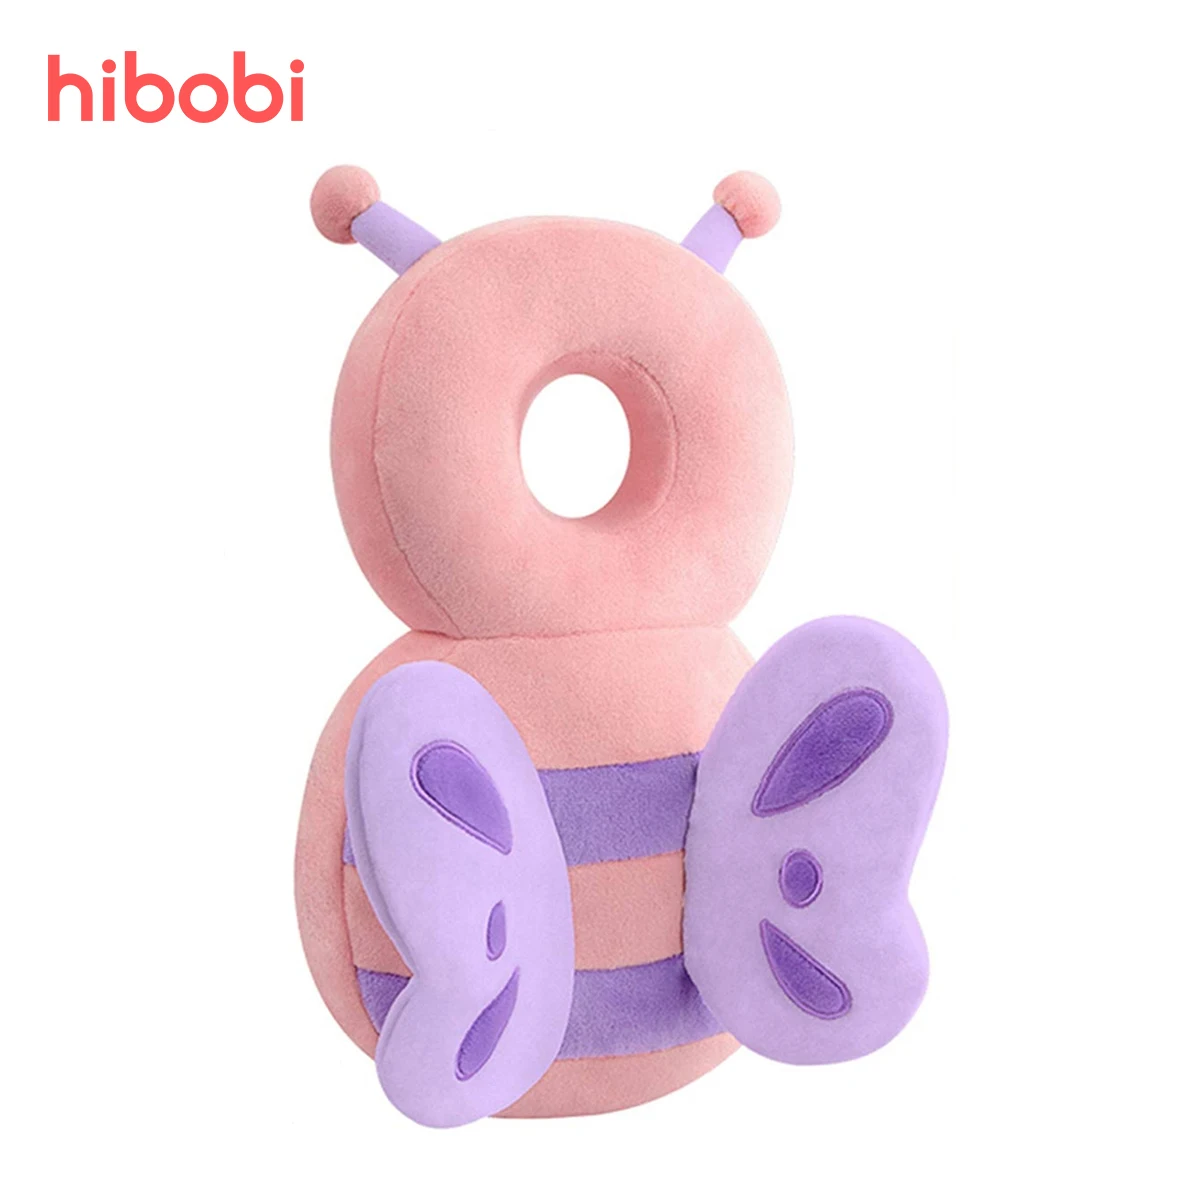 hibobi Baby Head Protector Anti-fall Cushion Back Prevent Injured 1-3T Toddler Baby Safety Pad Bee Cartoon Security Pillows